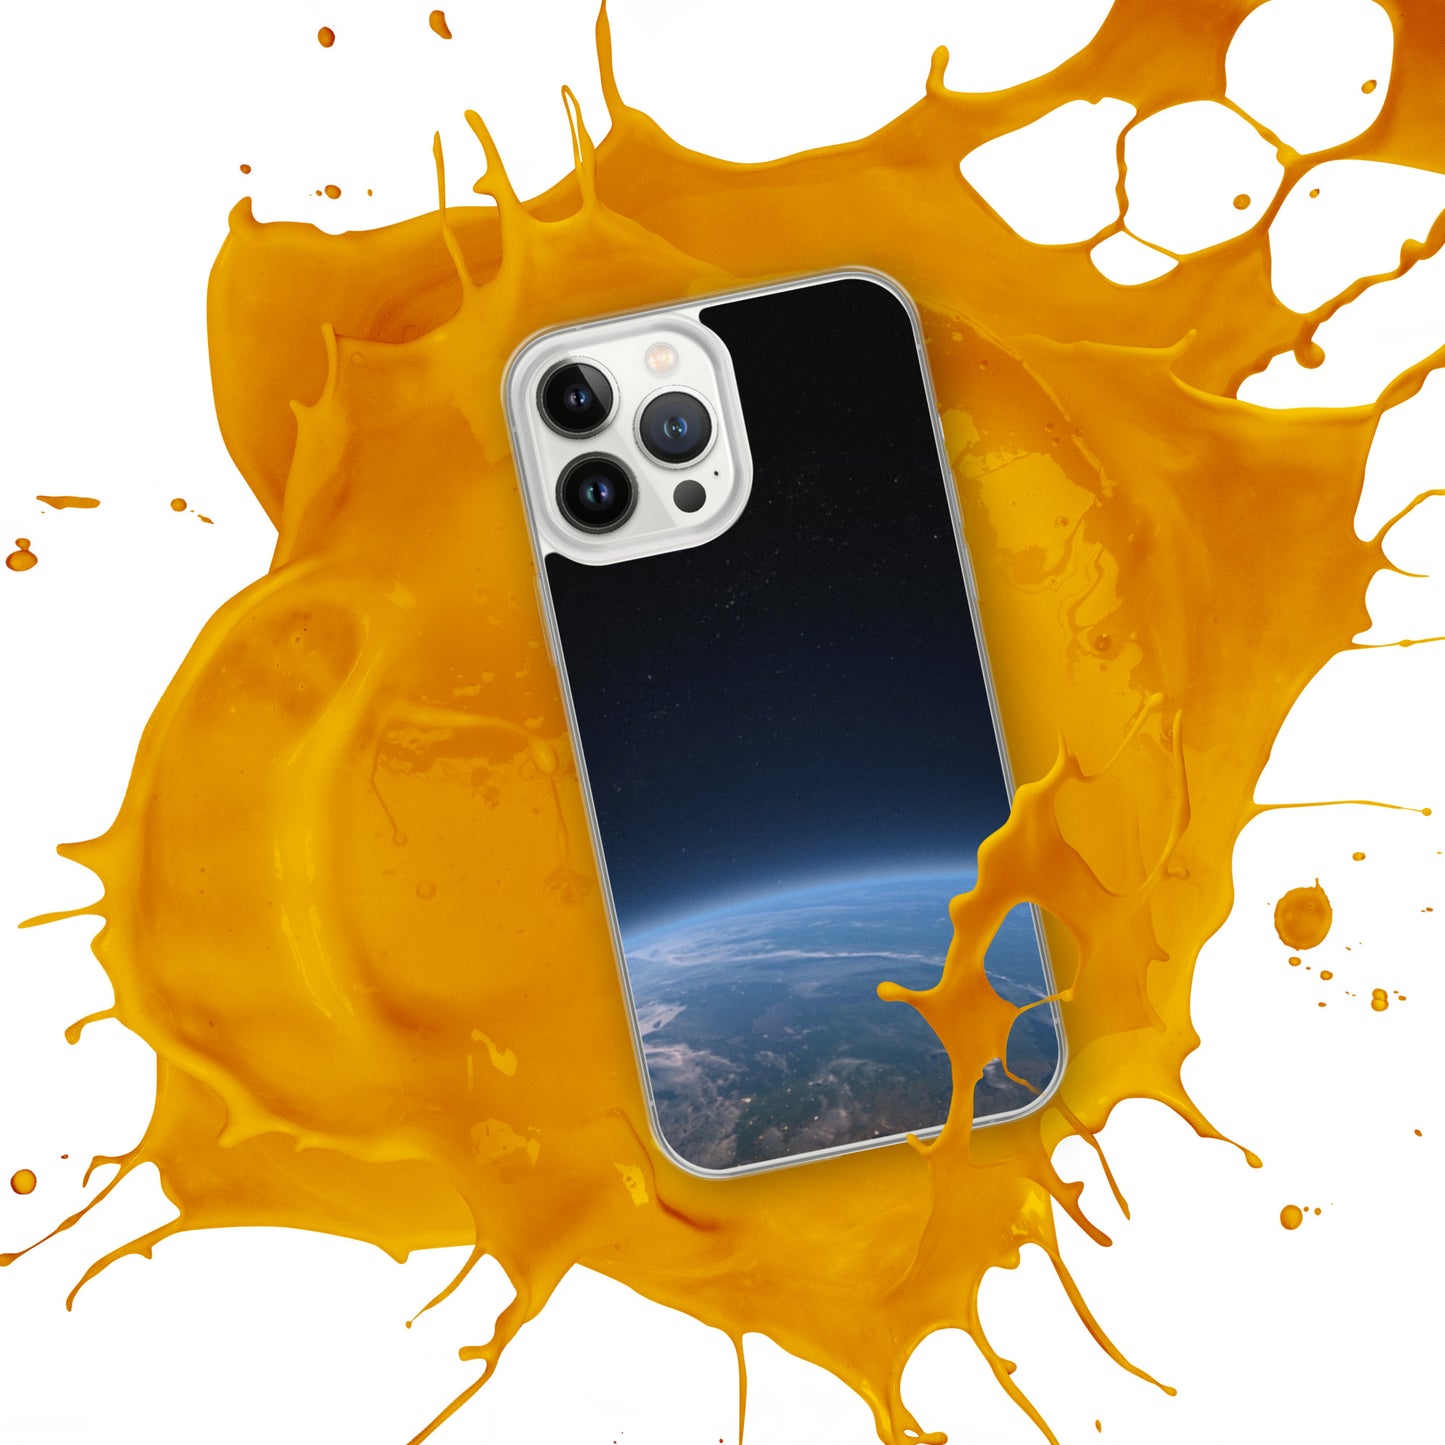 SPACE iPhone Case